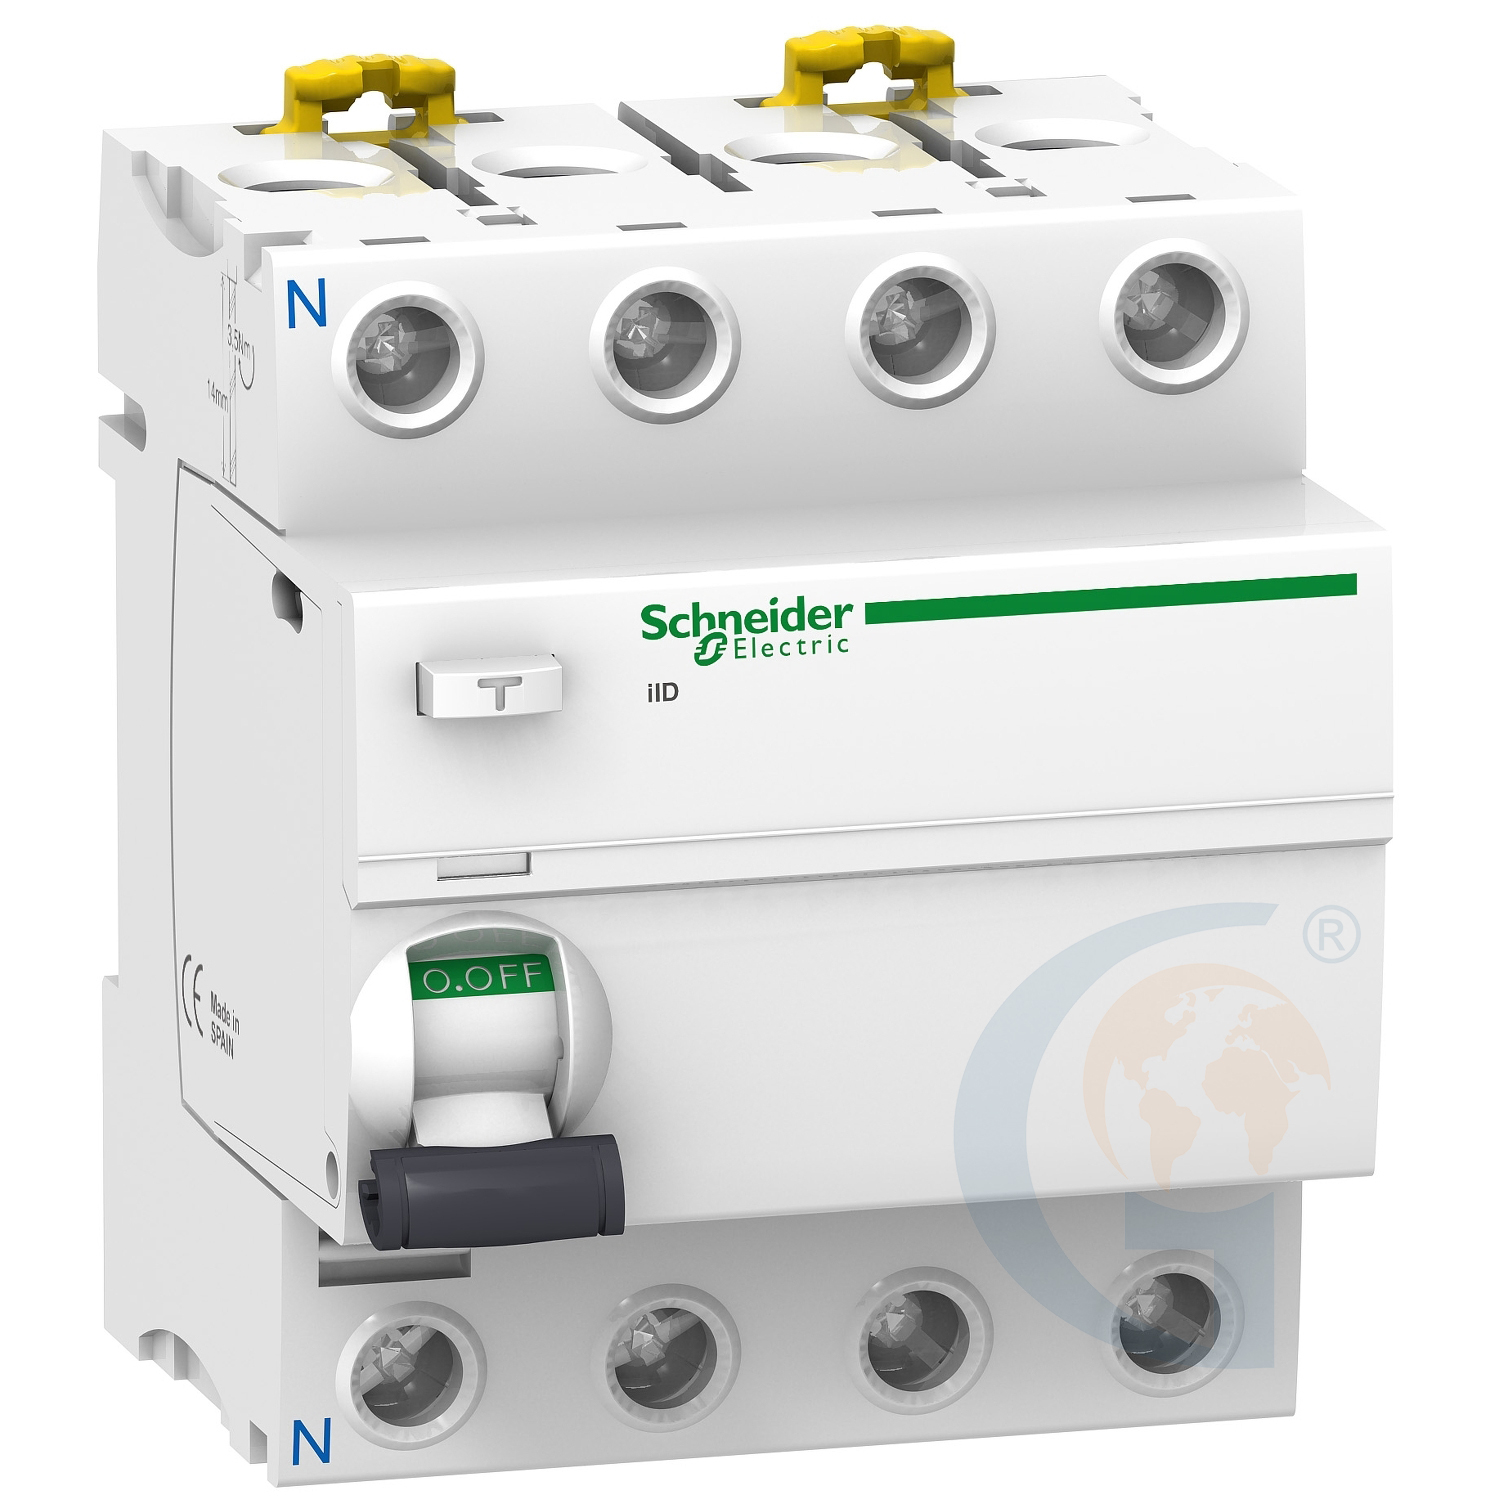 Schneider Electric A9R01425 ACTI 9 IID – RCCB – 4P – 25A – 30MA – TYPE A https://gesrepair.com/wp-content/uploads/2020/Schneider/Schneider_Electric_A9R01425_.jpg